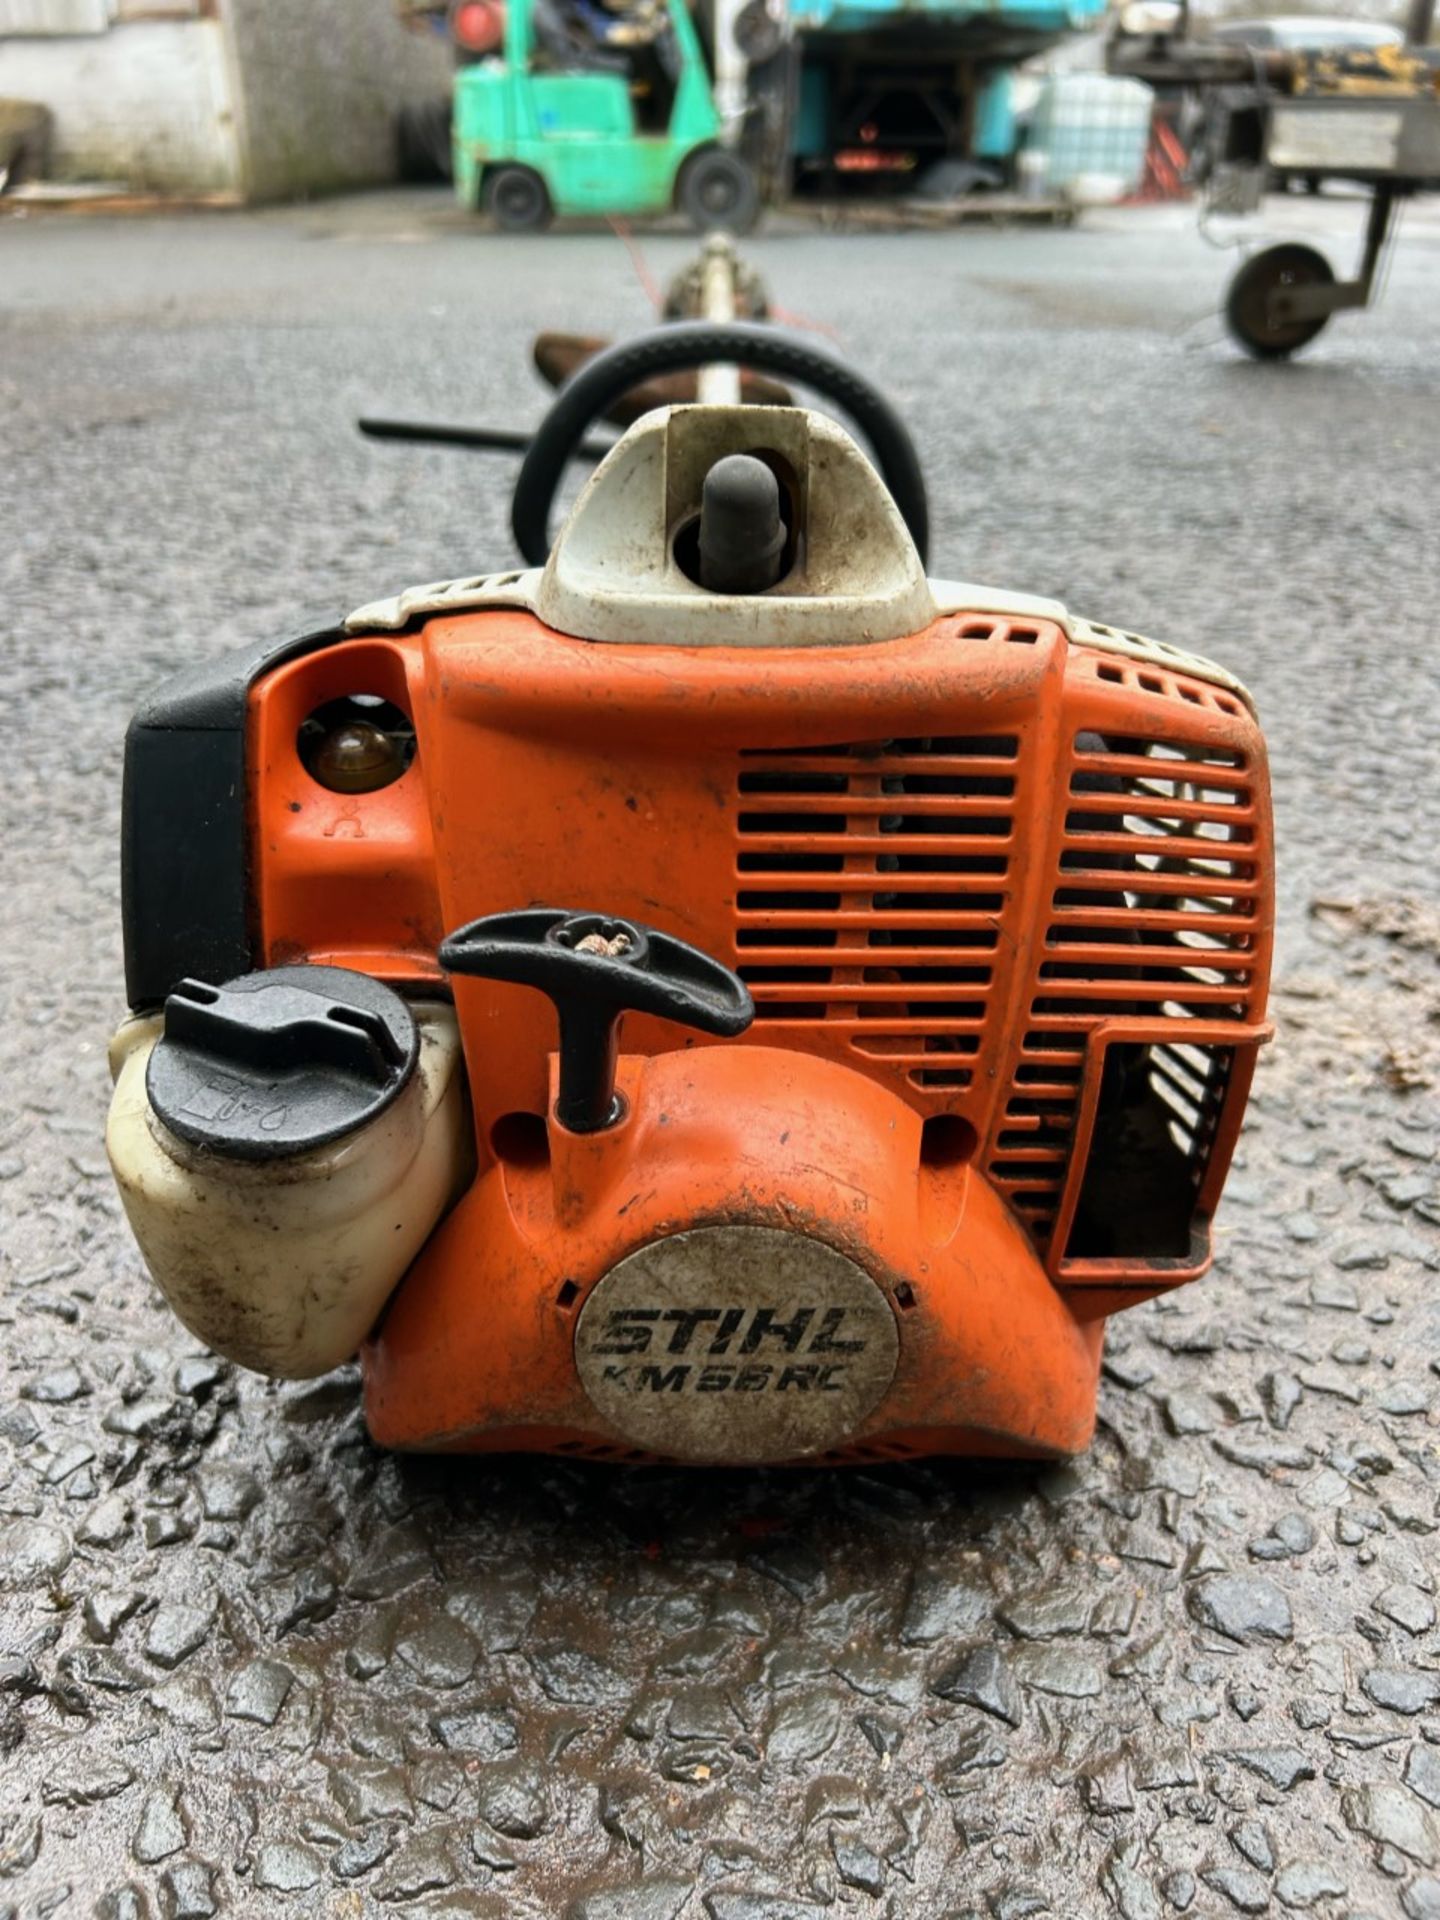 Stihl KM56RC 2018 Kombi engine with brushcutter attachment. Starts and runs as it should as seen